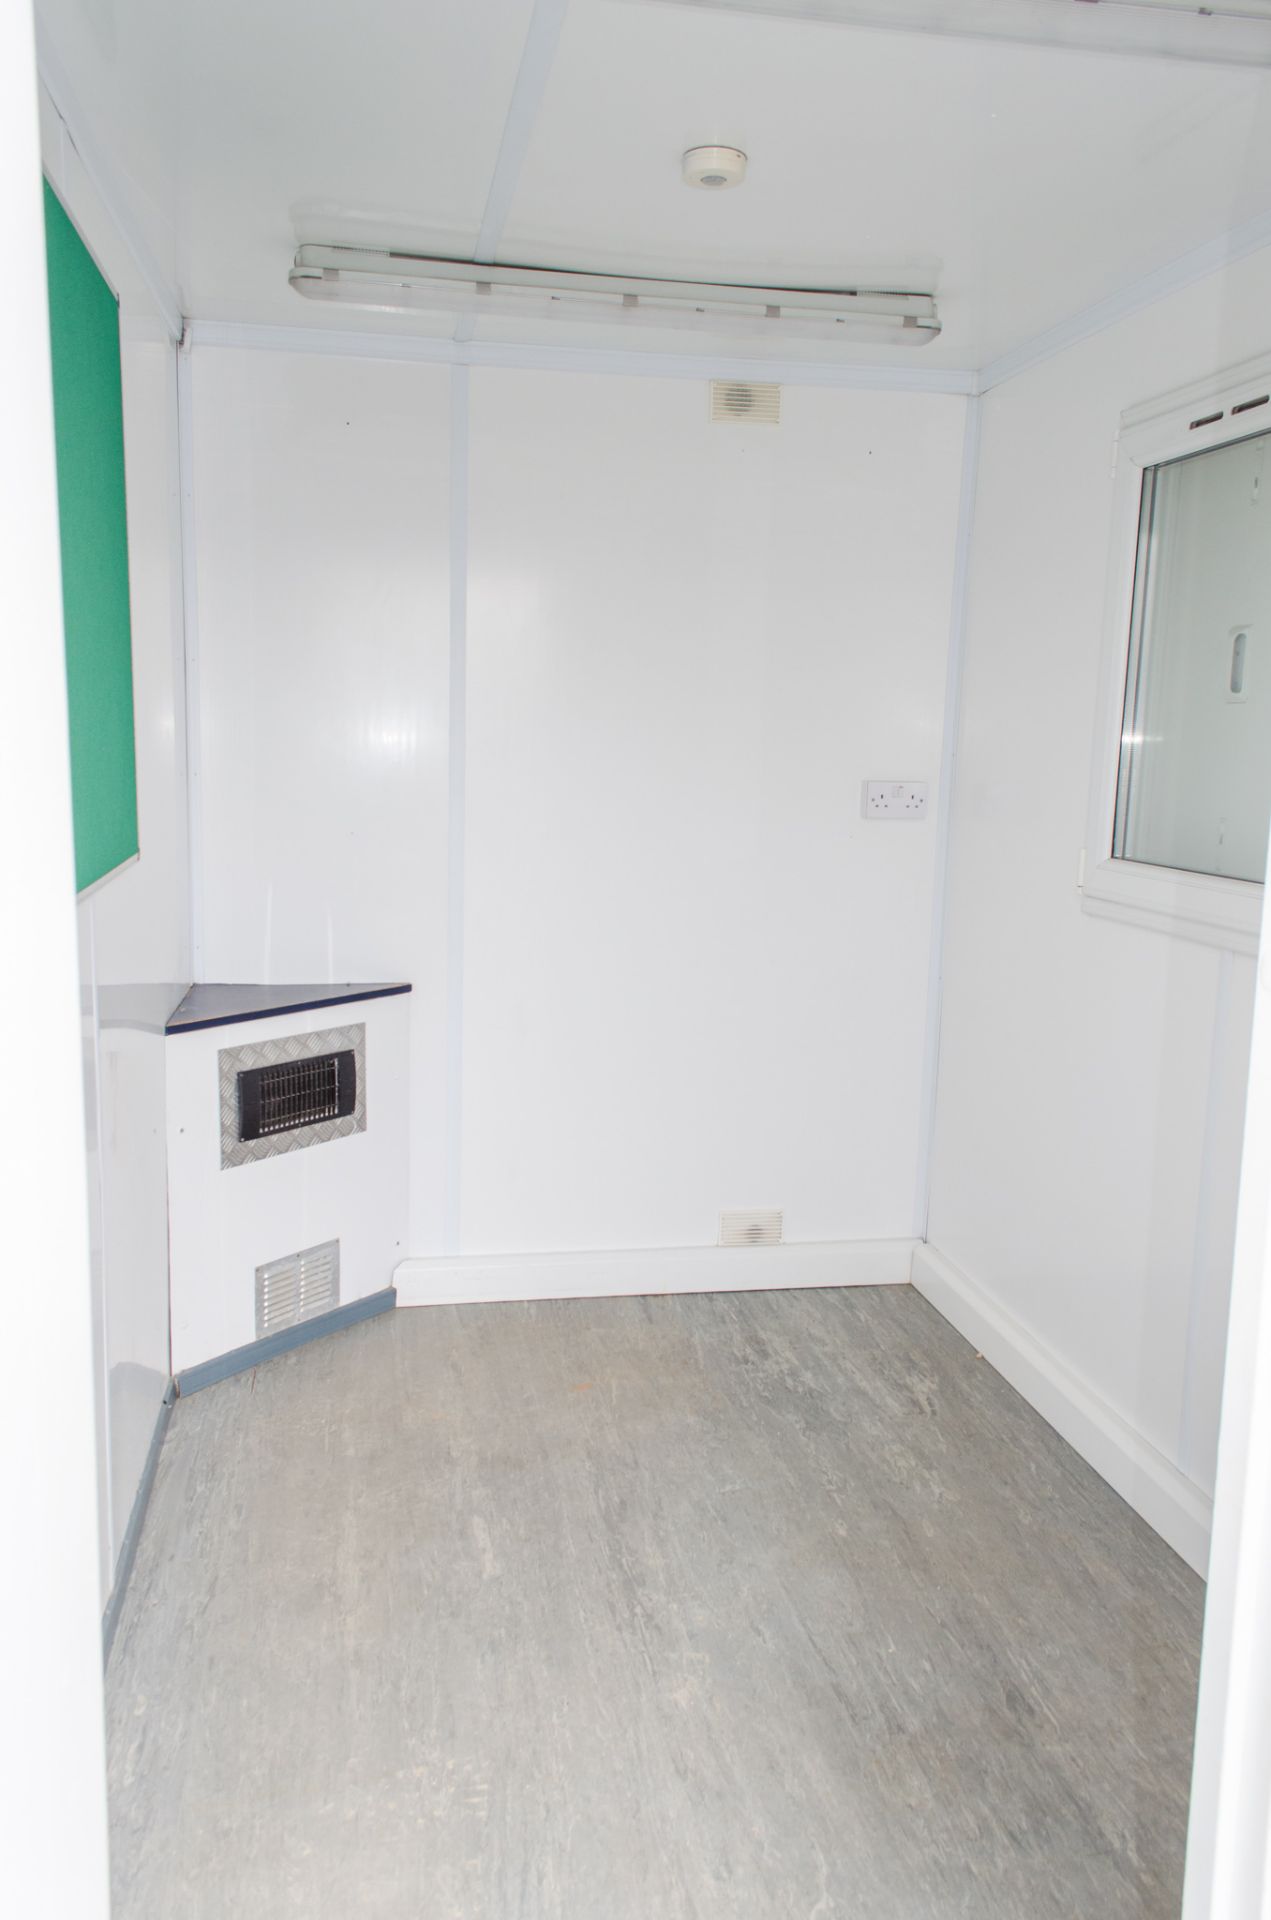 24 ft x 9 ft steel anti vandal welfare site unit Comprising of: canteen area, drying room, office, - Image 8 of 10